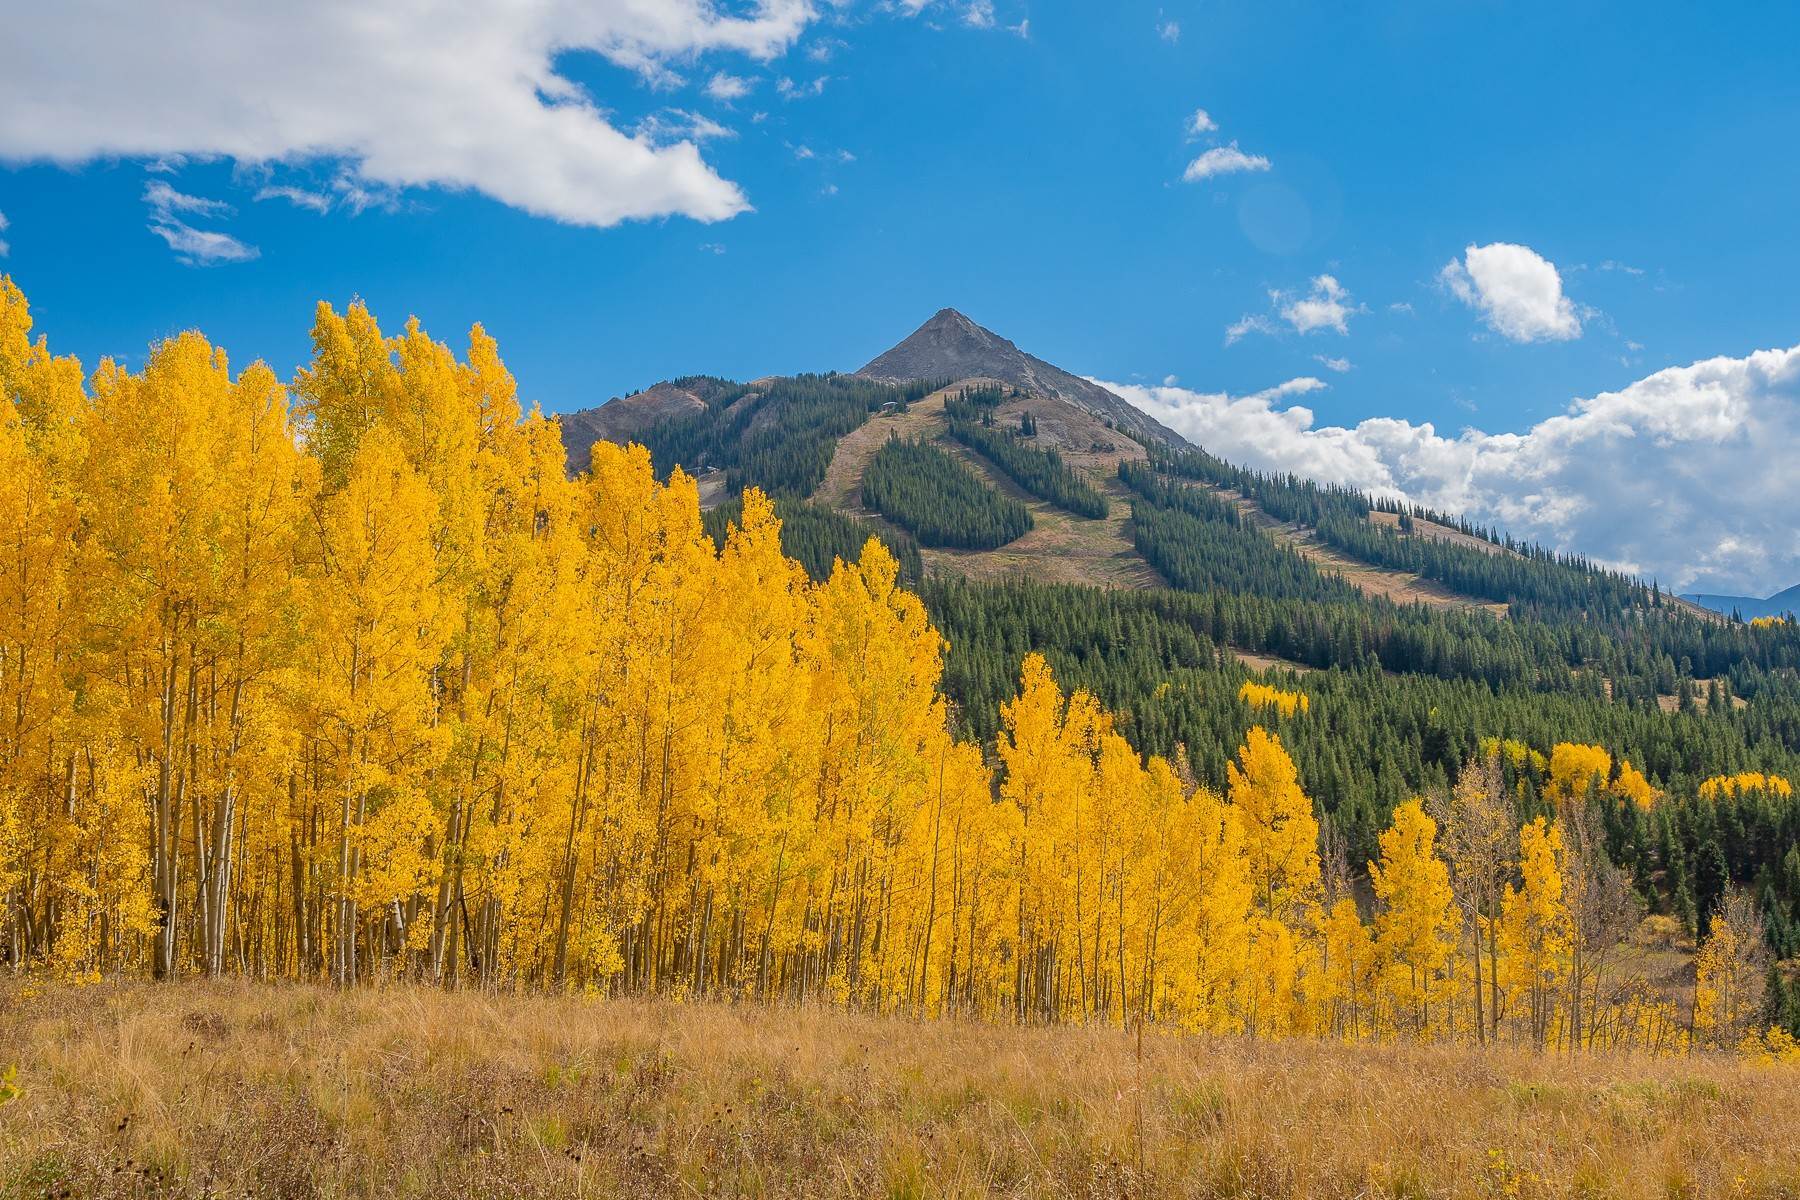 Land for Sale at F7 Prospect Drive - Upper Prospect F7 Prospect Drive Mount Crested Butte, Colorado 81225 United States